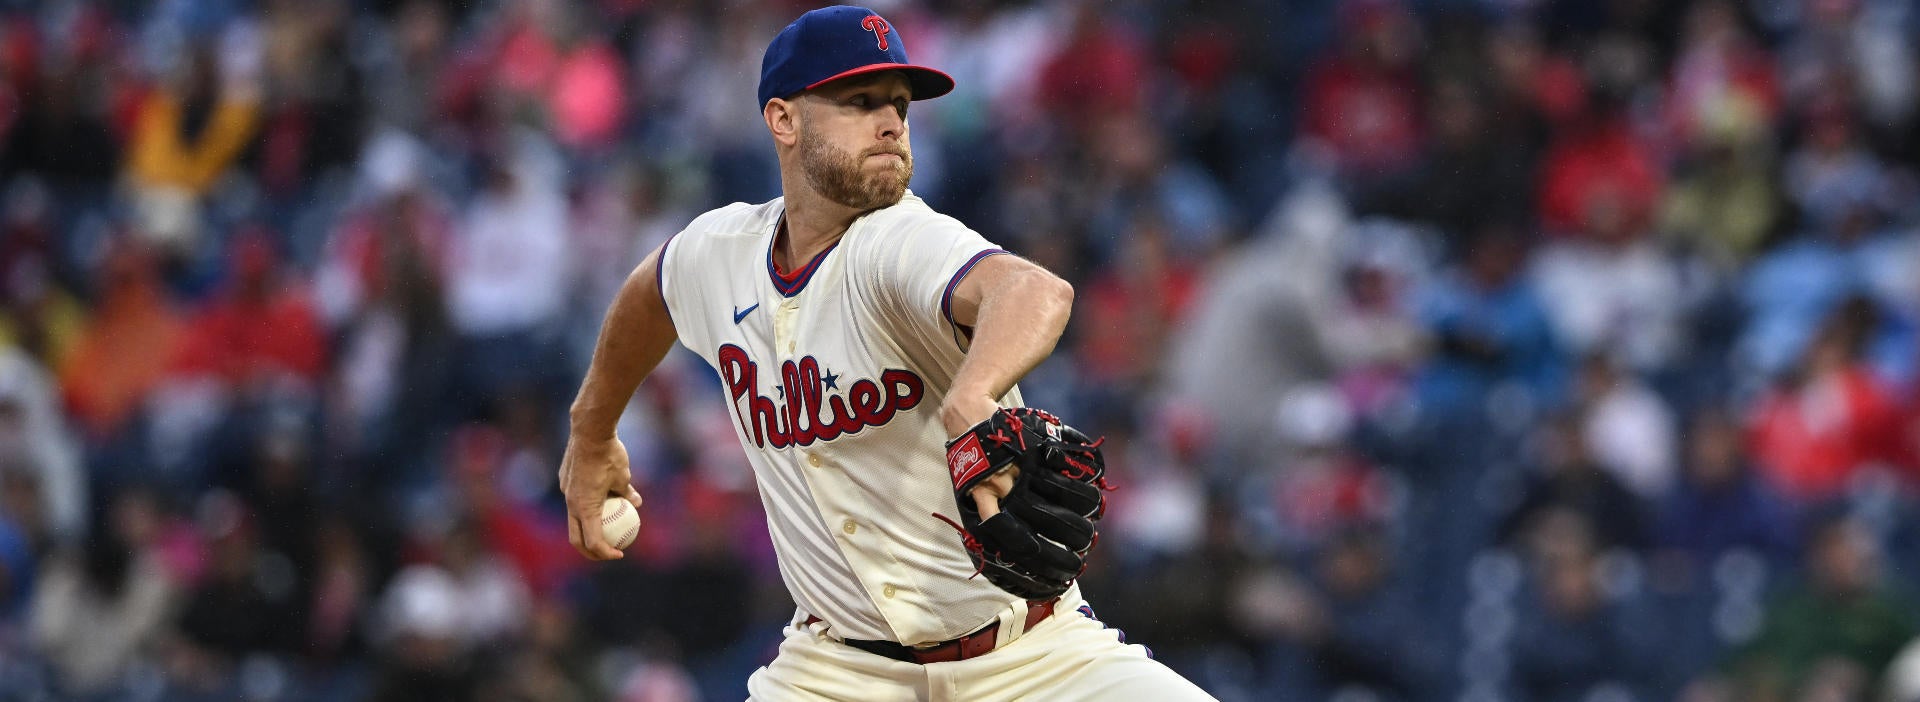 Phillies vs. Braves NLDS Game 2 Monday probable pitchers, odds, trends: Bettors backing Atlanta to rebound behind Max Fried